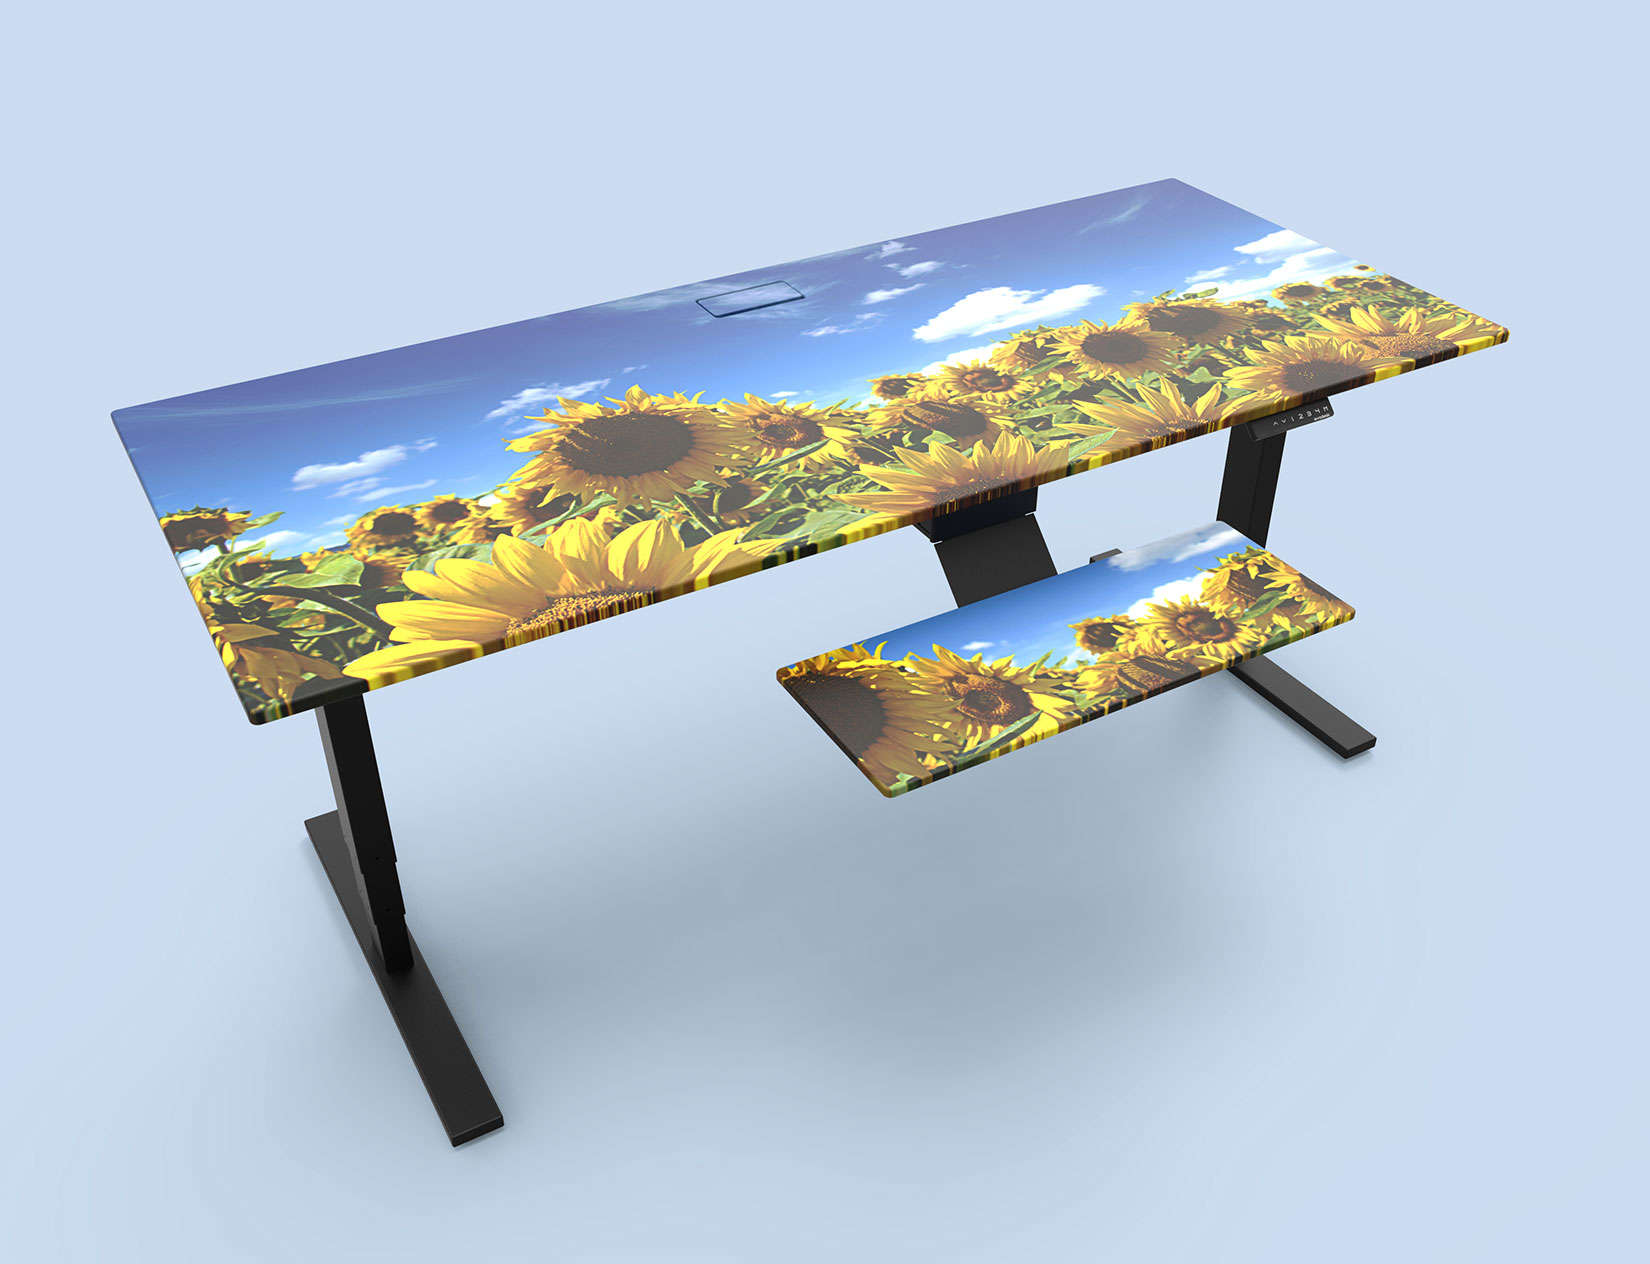 This standing desk cover will make you feel like you are working in a field of sunflowers.